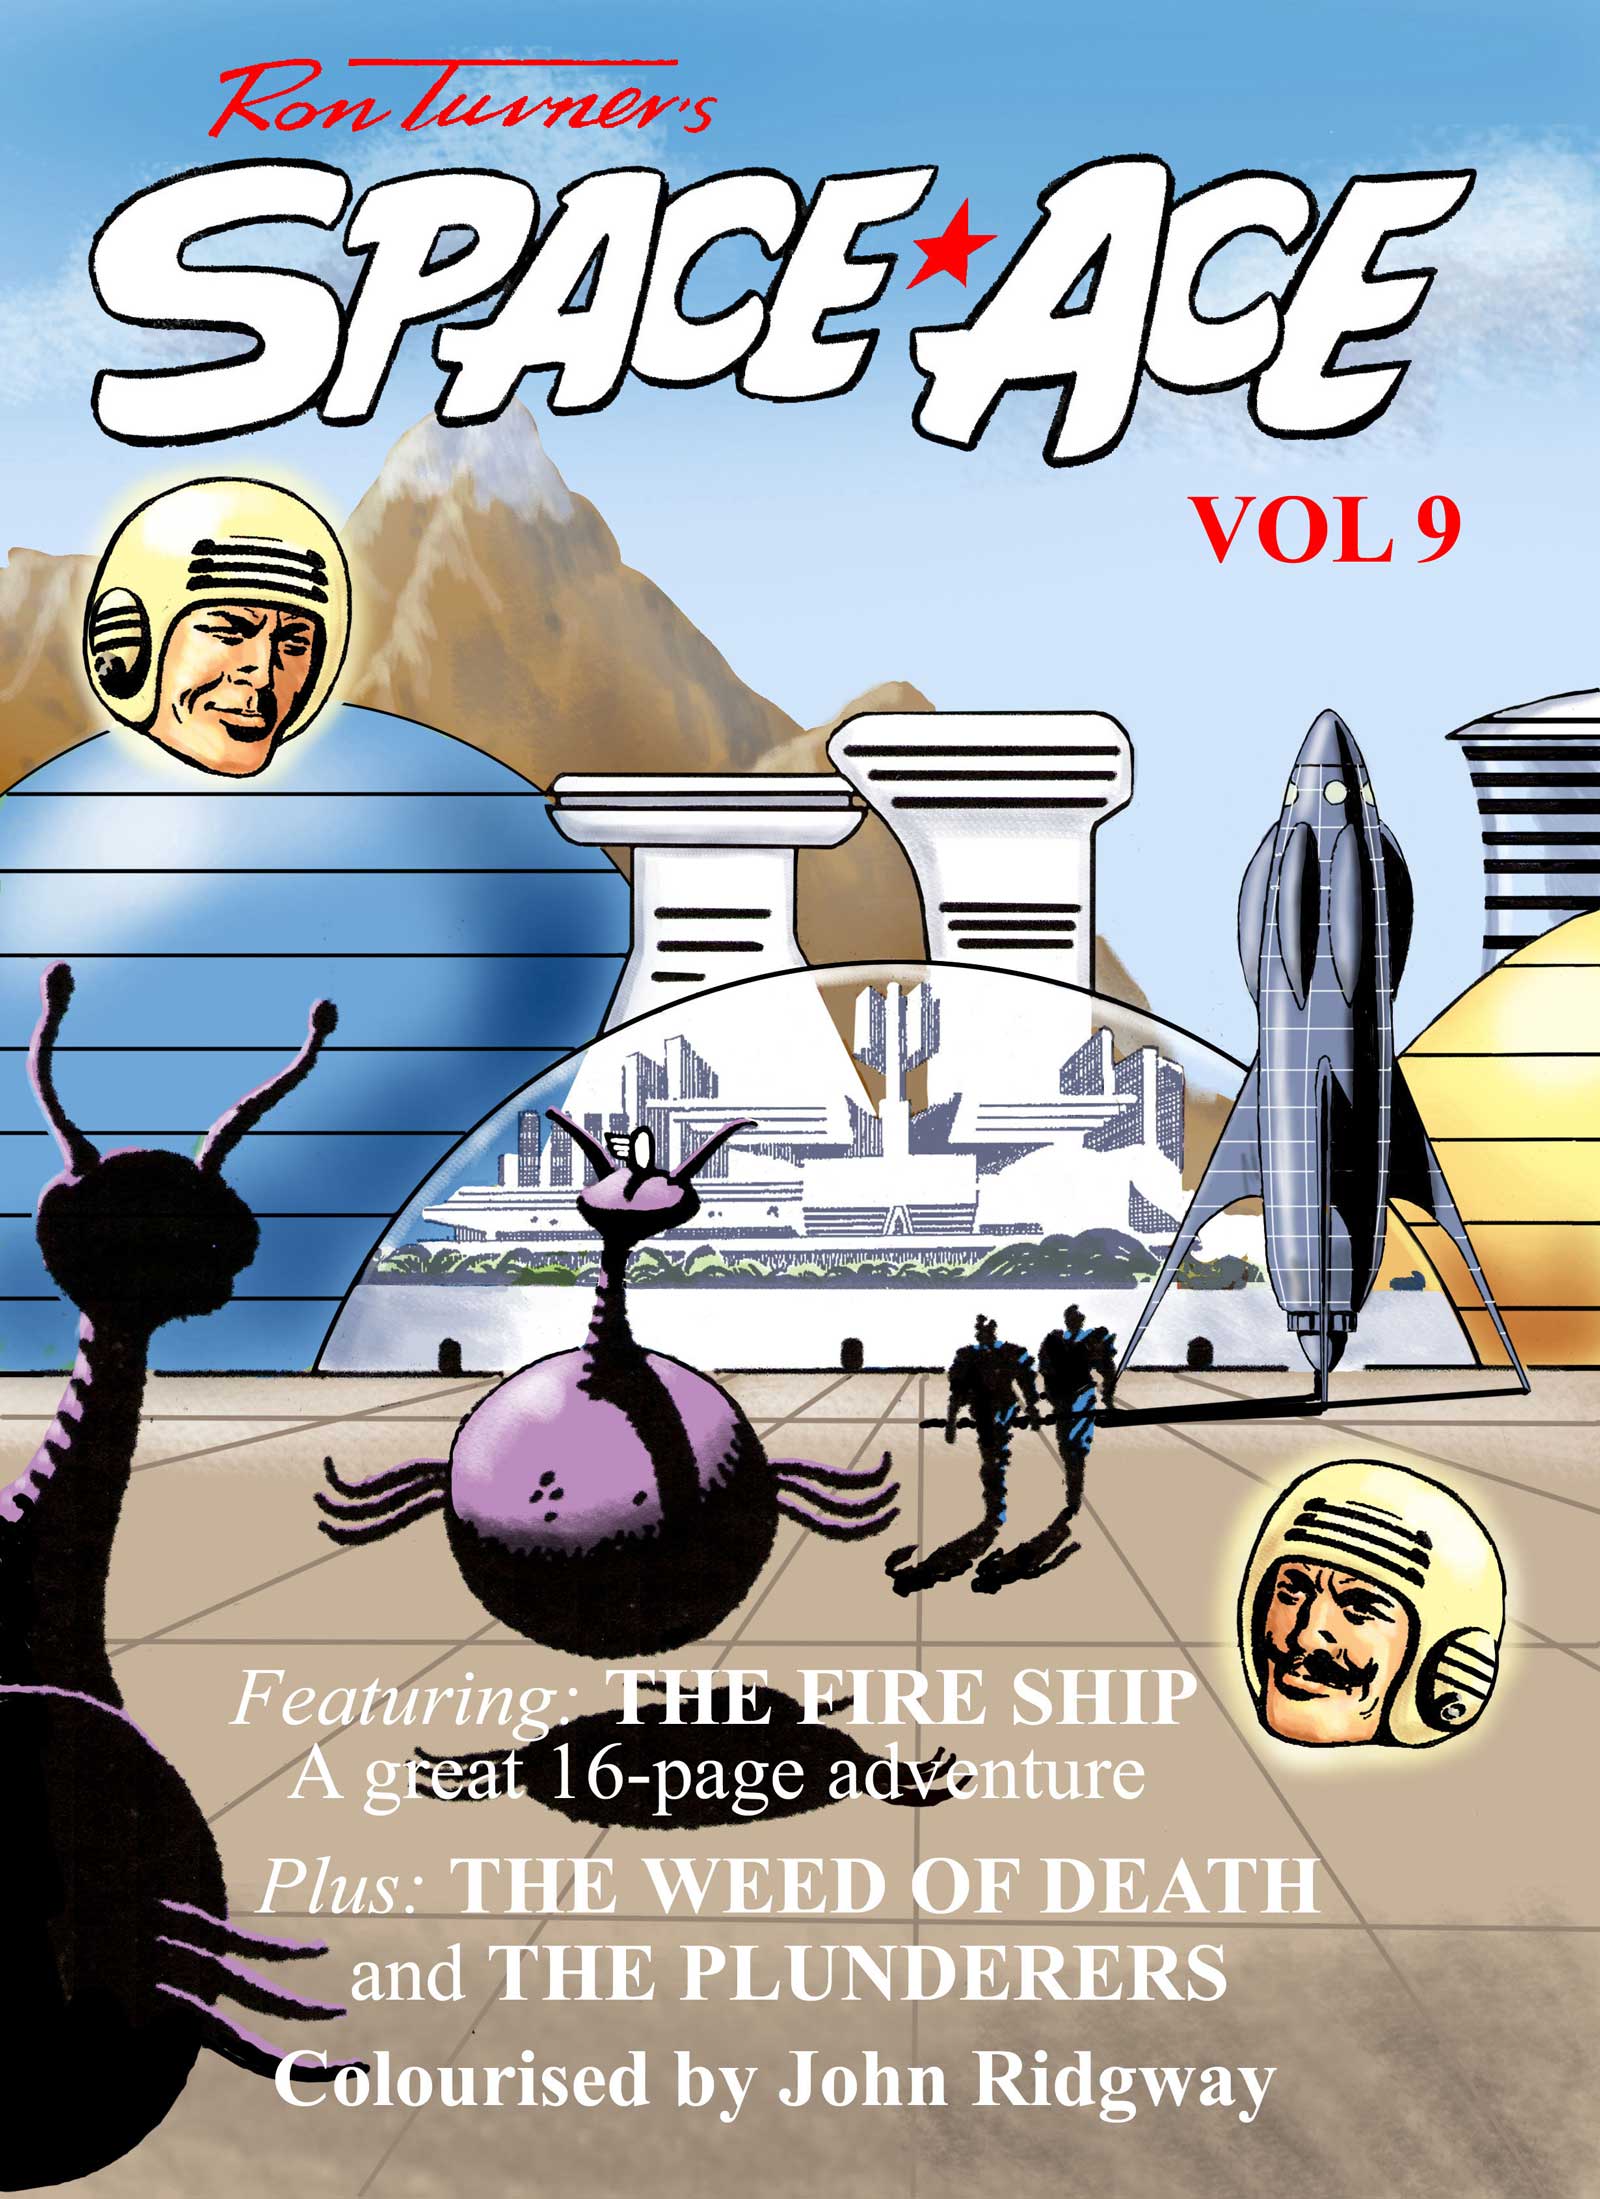 Space Ace Volume 9 - Cover